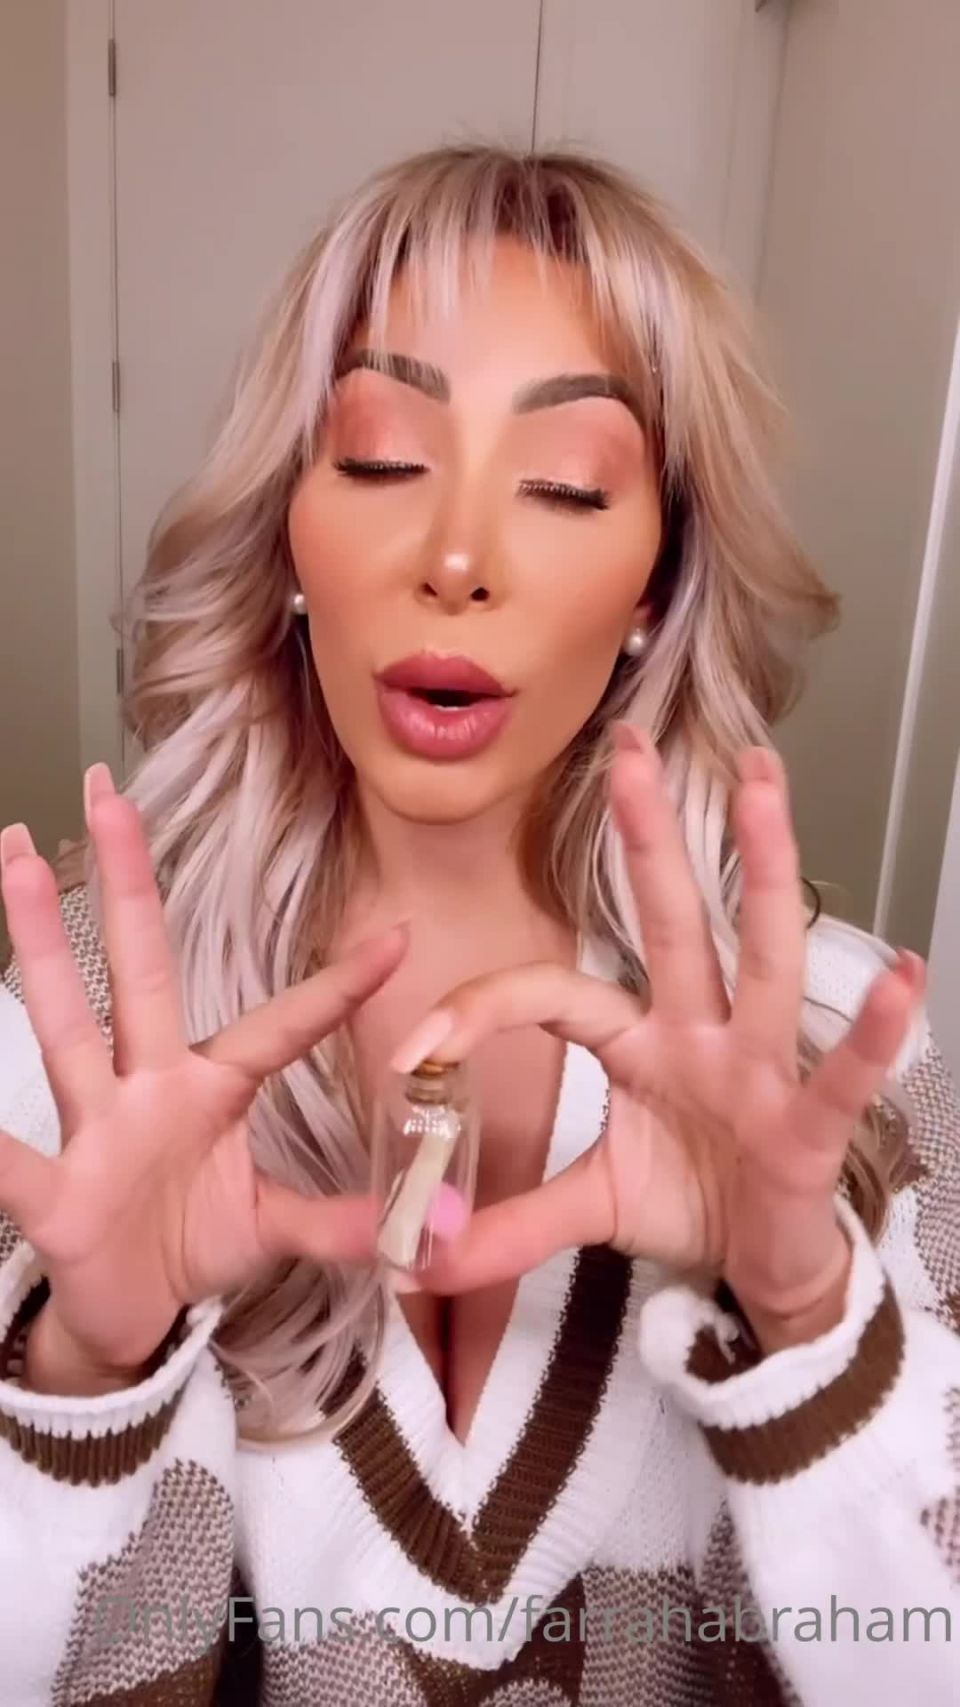 FARRAH ABRAHAM () Farrahabraham - farrah farts exclusive jars only aromatherapy jars are here yay desktop only fans 03-12-2021